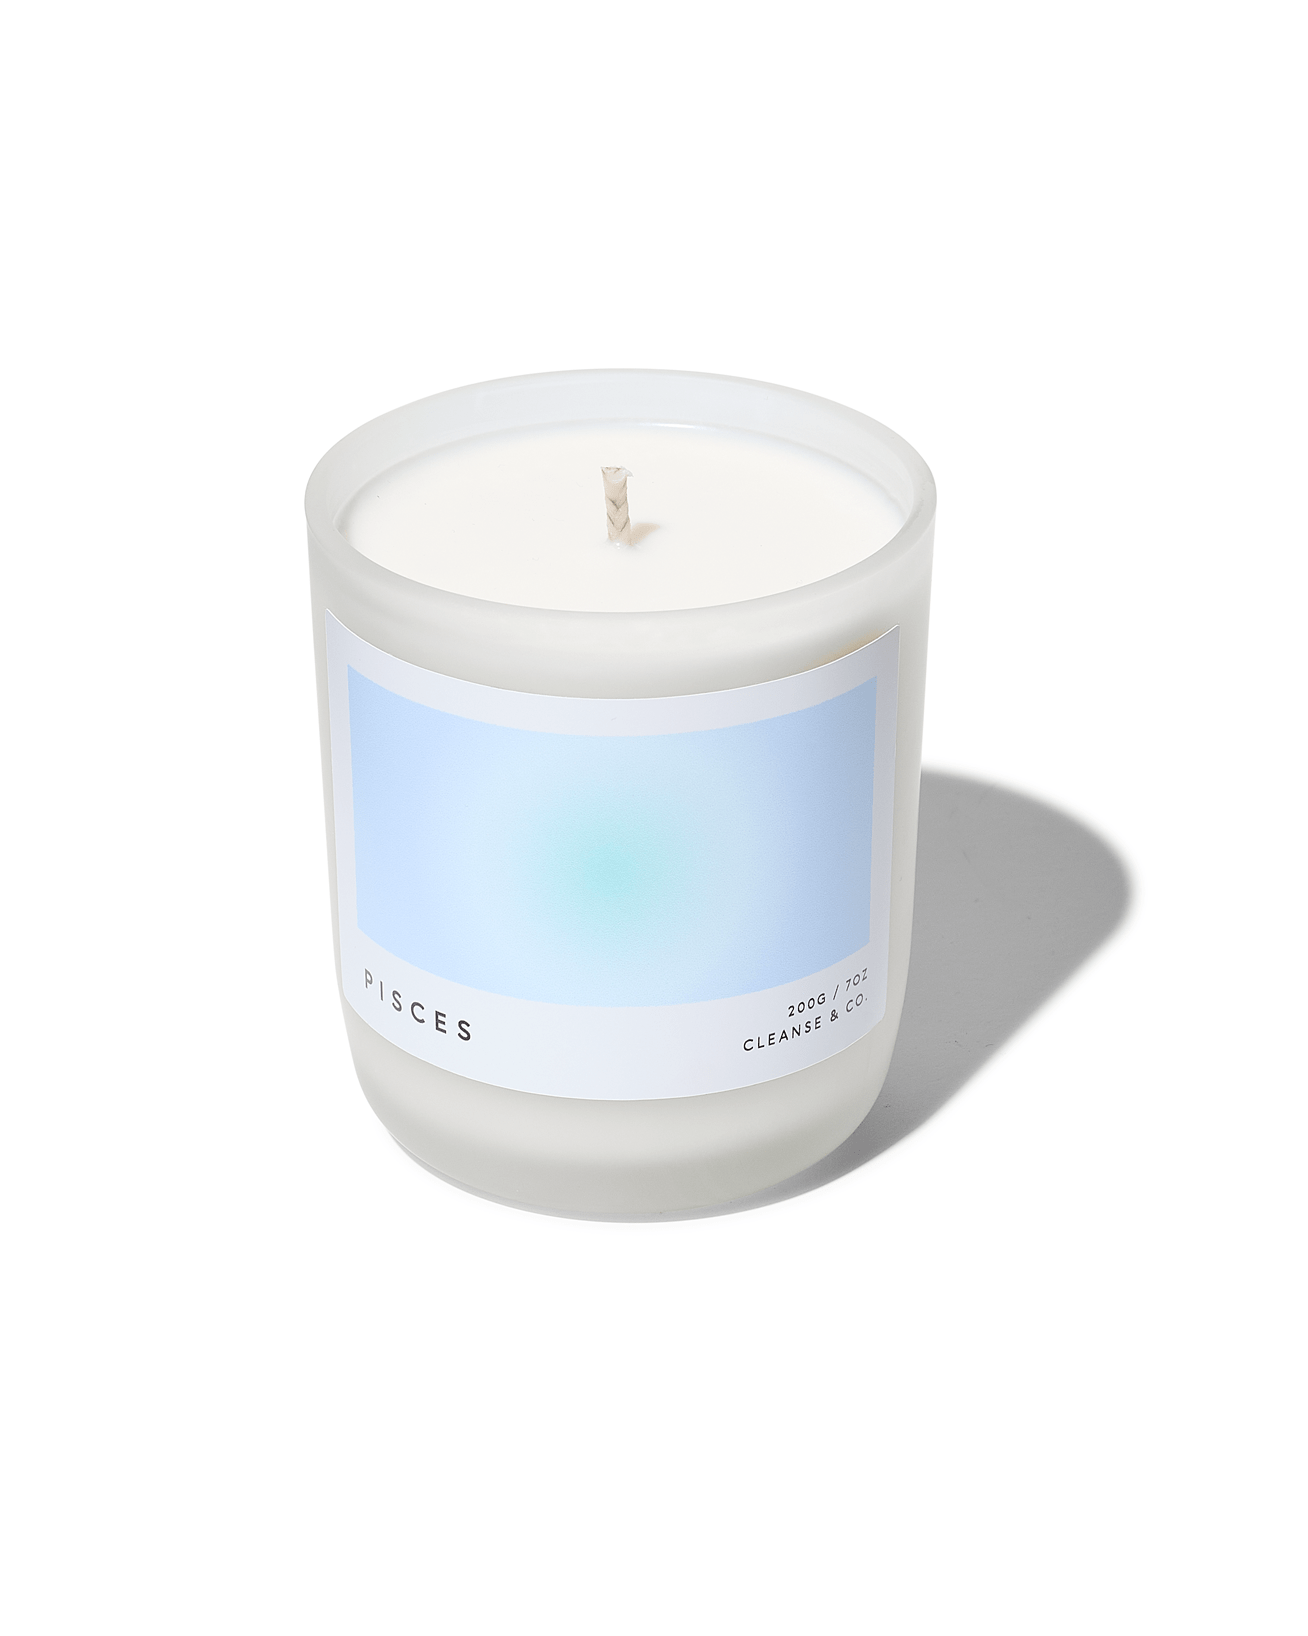 Pisces - Aura Candle: 200G / Grapefruit & White Orchid by Cleanse & Co.